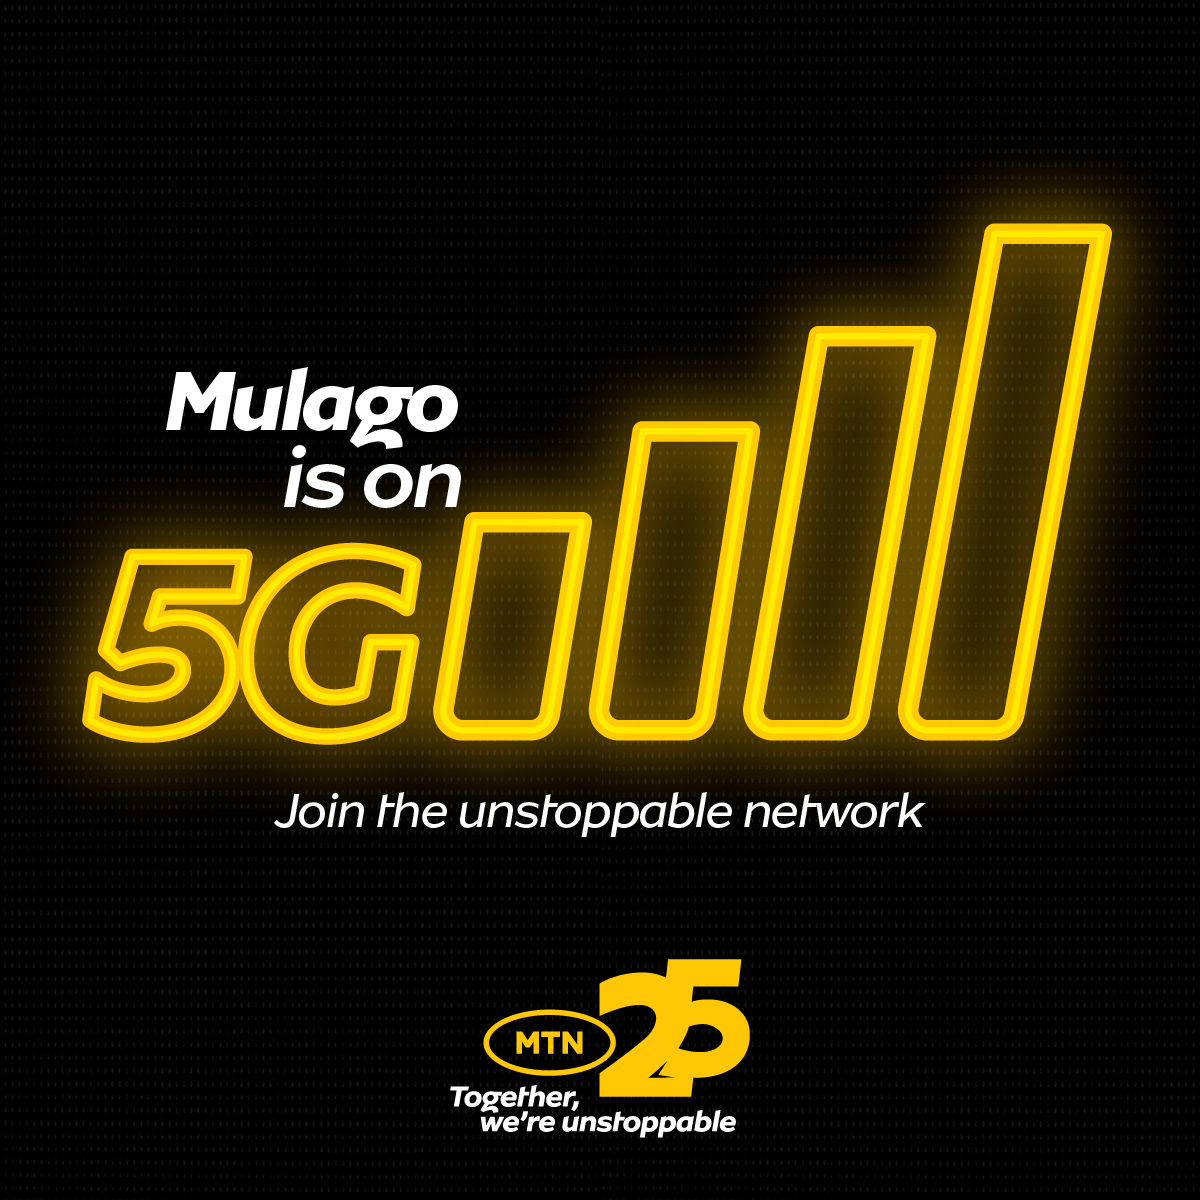 Where are you enjoying #MTN4G+ and #MTN5G from? #UnstoppableNetwork #TogetherWereUnstoppable